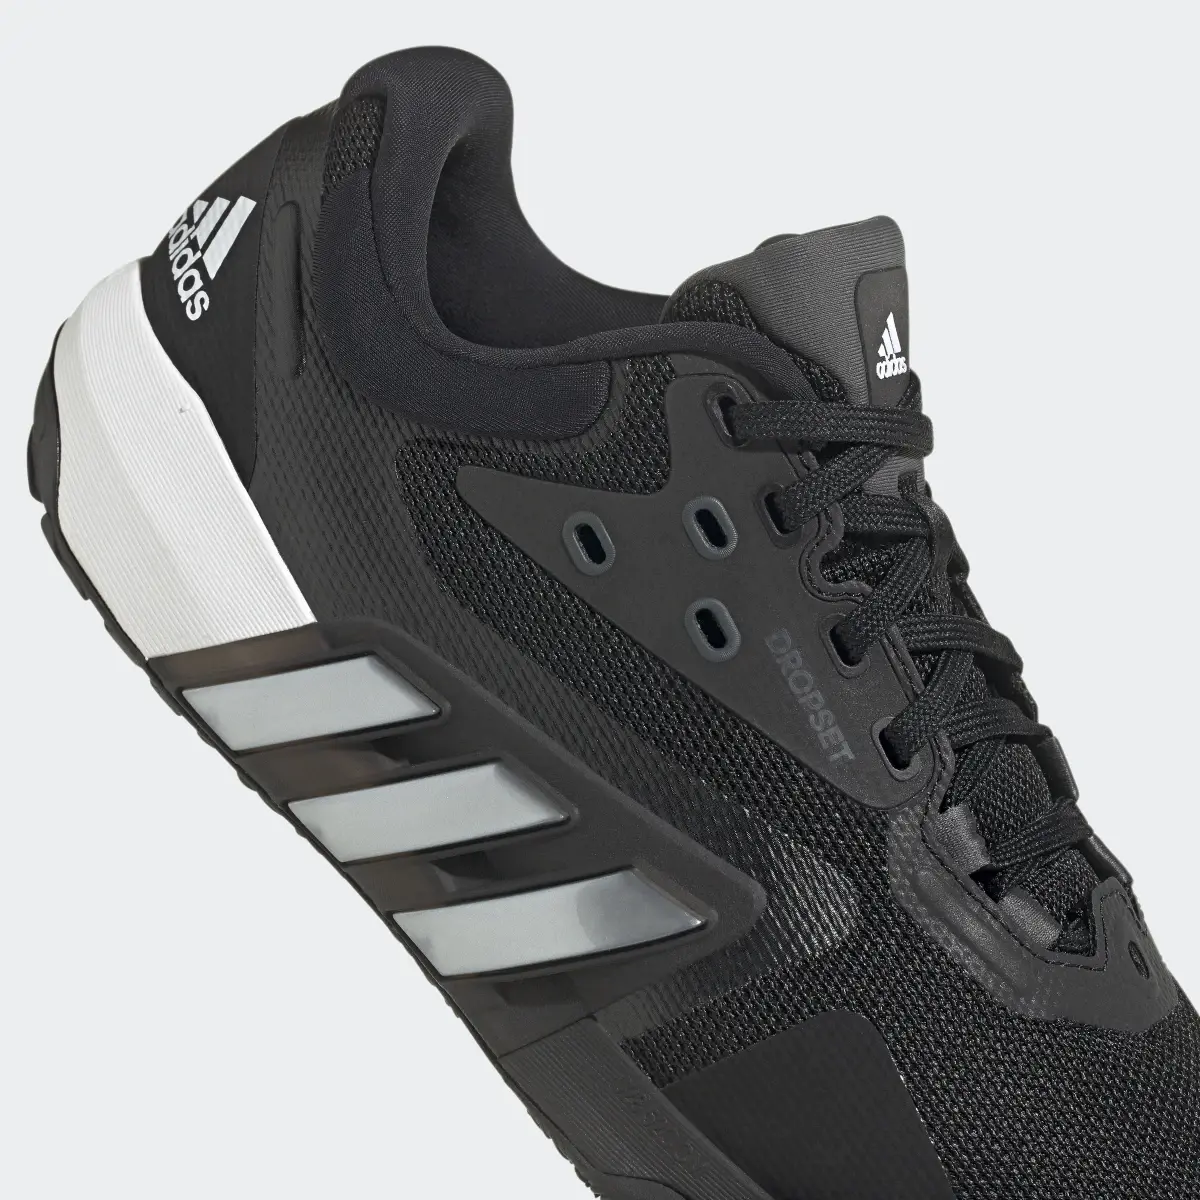 Adidas Dropset Trainer Shoes. 3